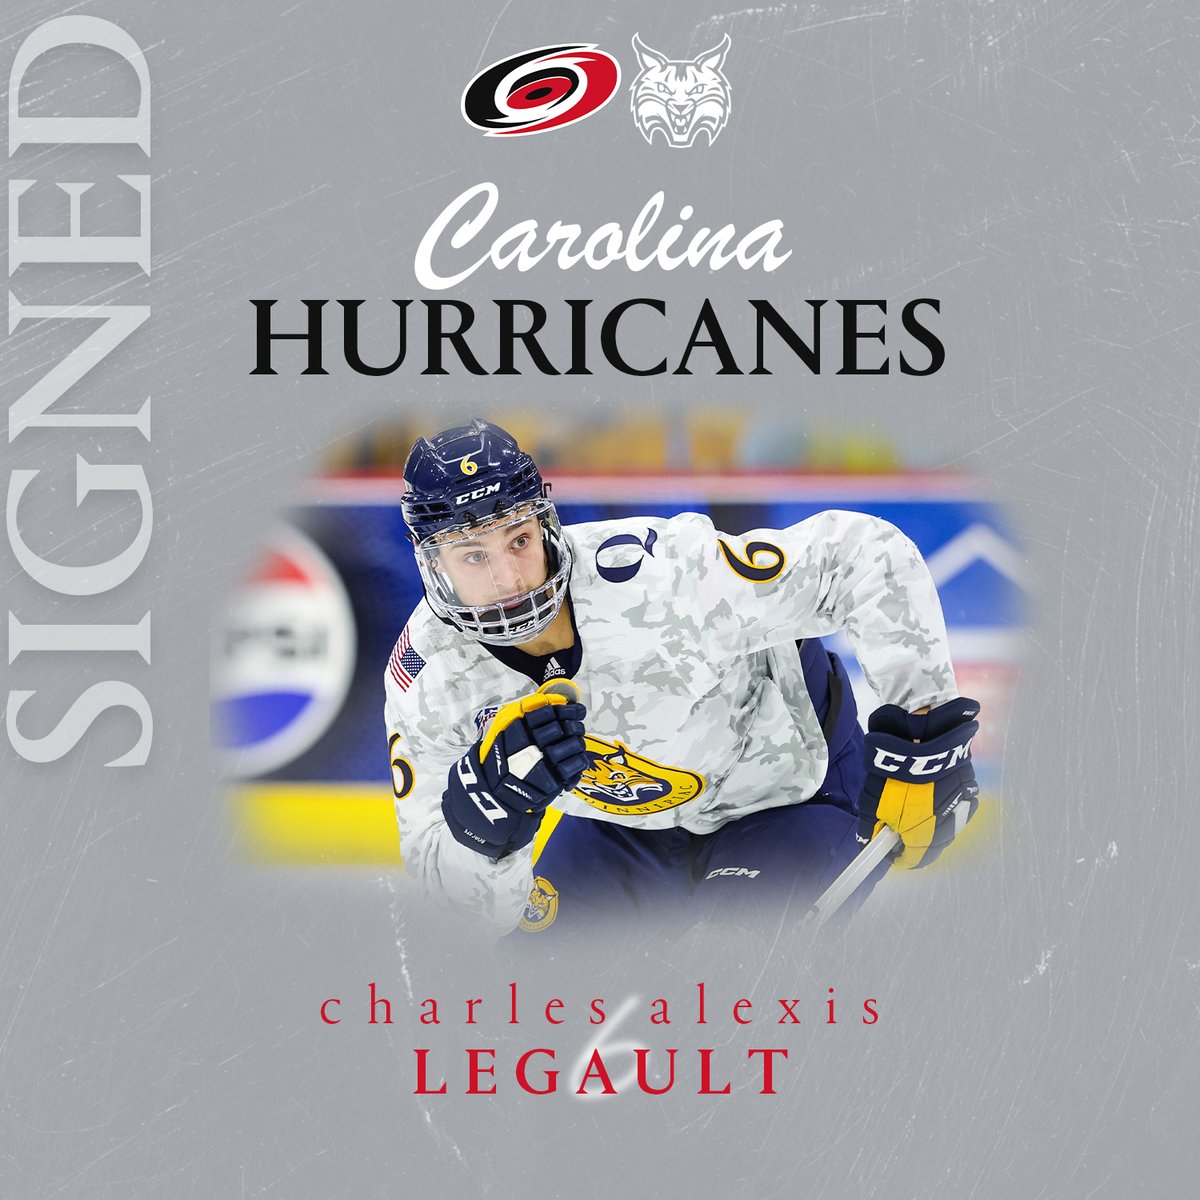 𝐒𝐈𝐆𝐍𝐄𝐃 Charles has signed his three-year, entry level contract with the Hurricanes! #BobcatNation x @Canes